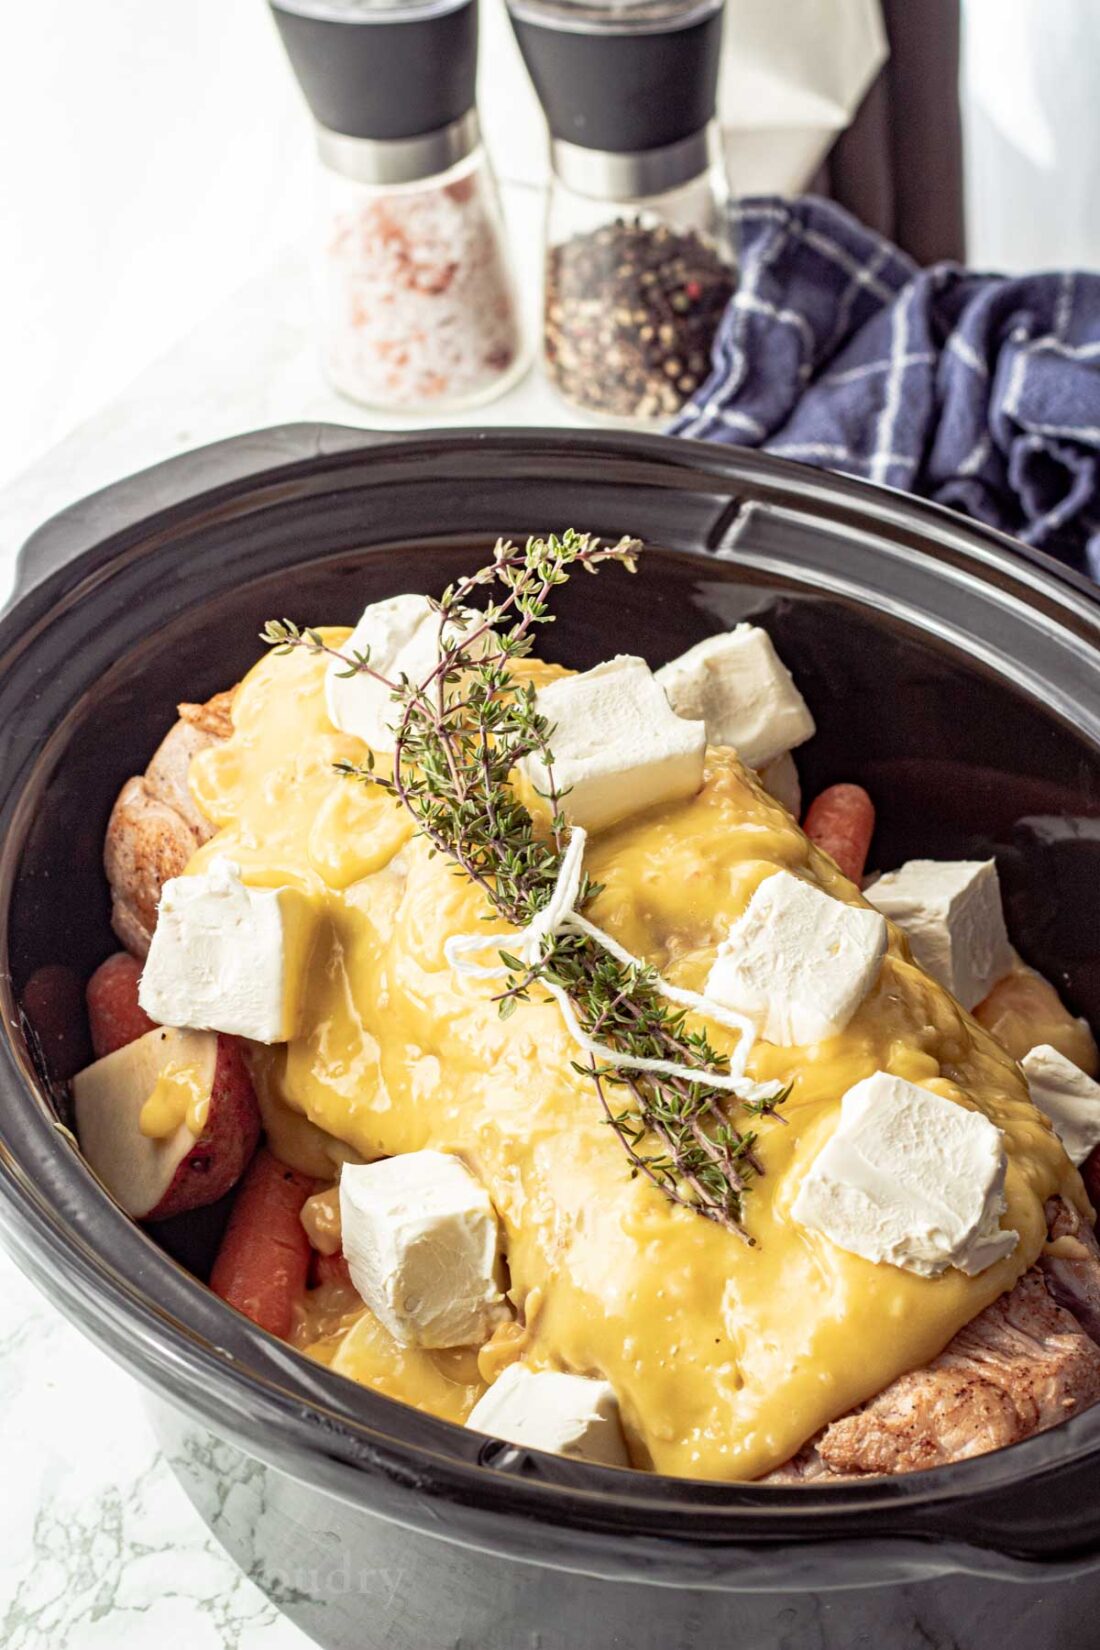 black slow cooker with sauce-covered pork roast and thyme.